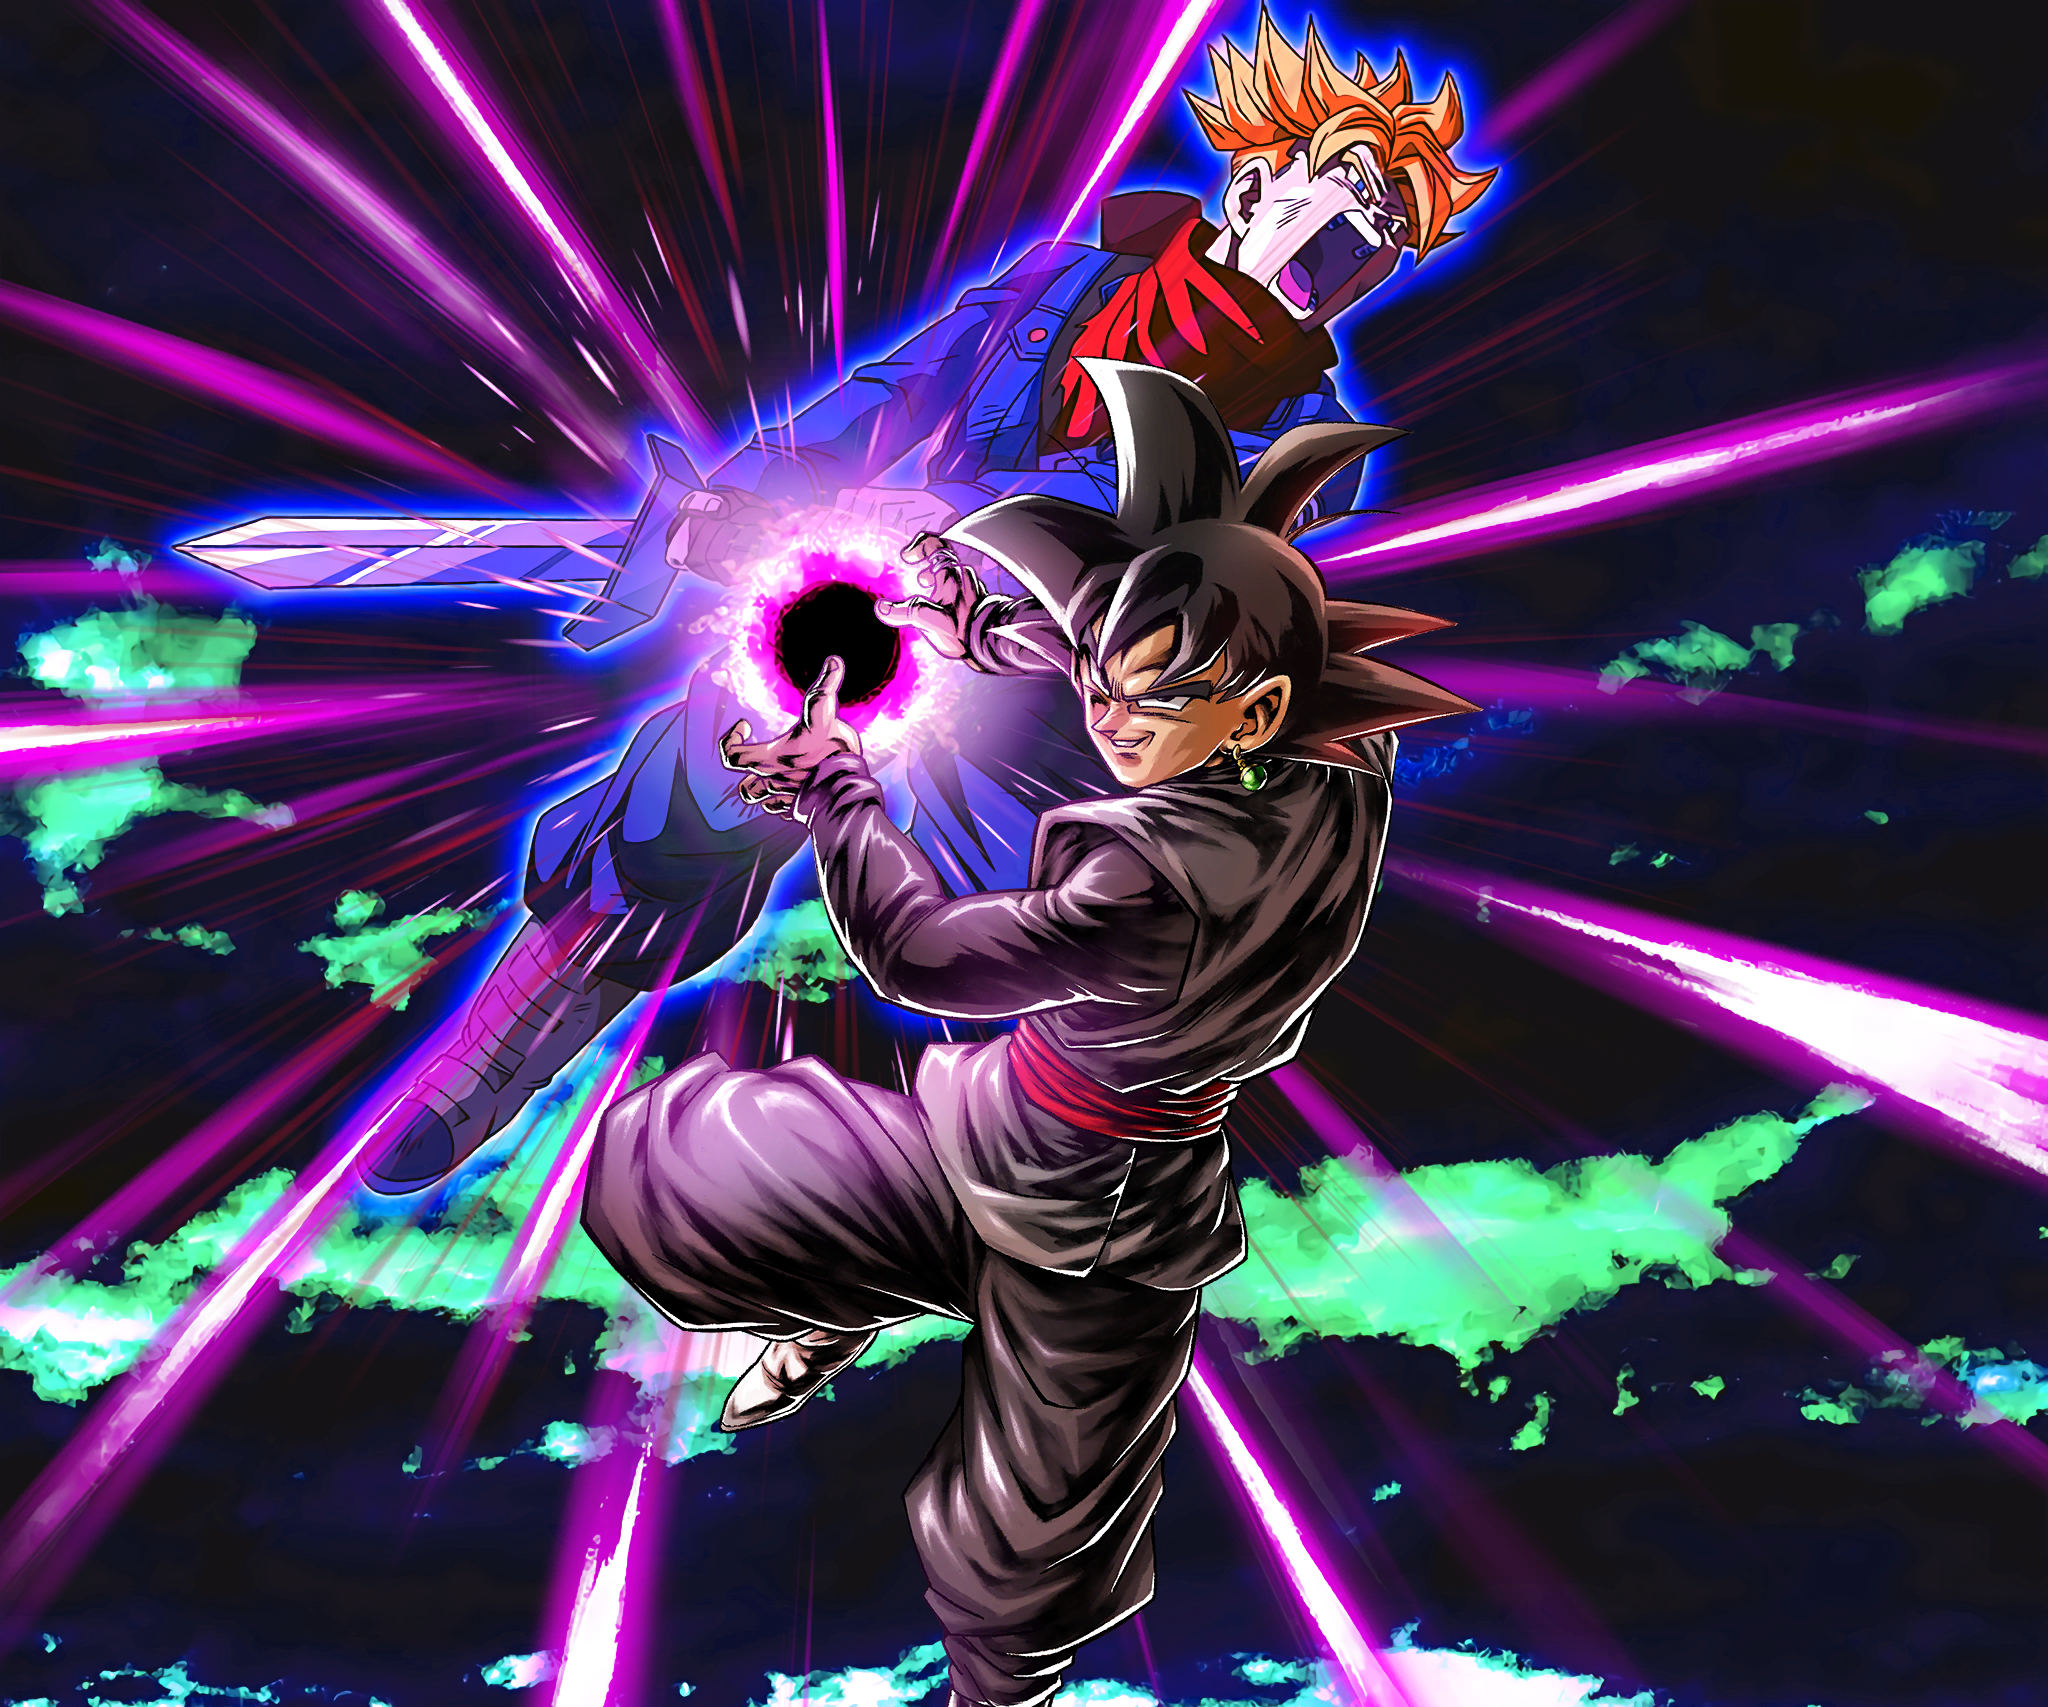 11 Black Goku Wallpaper 4k For iPhone Android and Desktop  Page 4 of 4   The RamenSwag